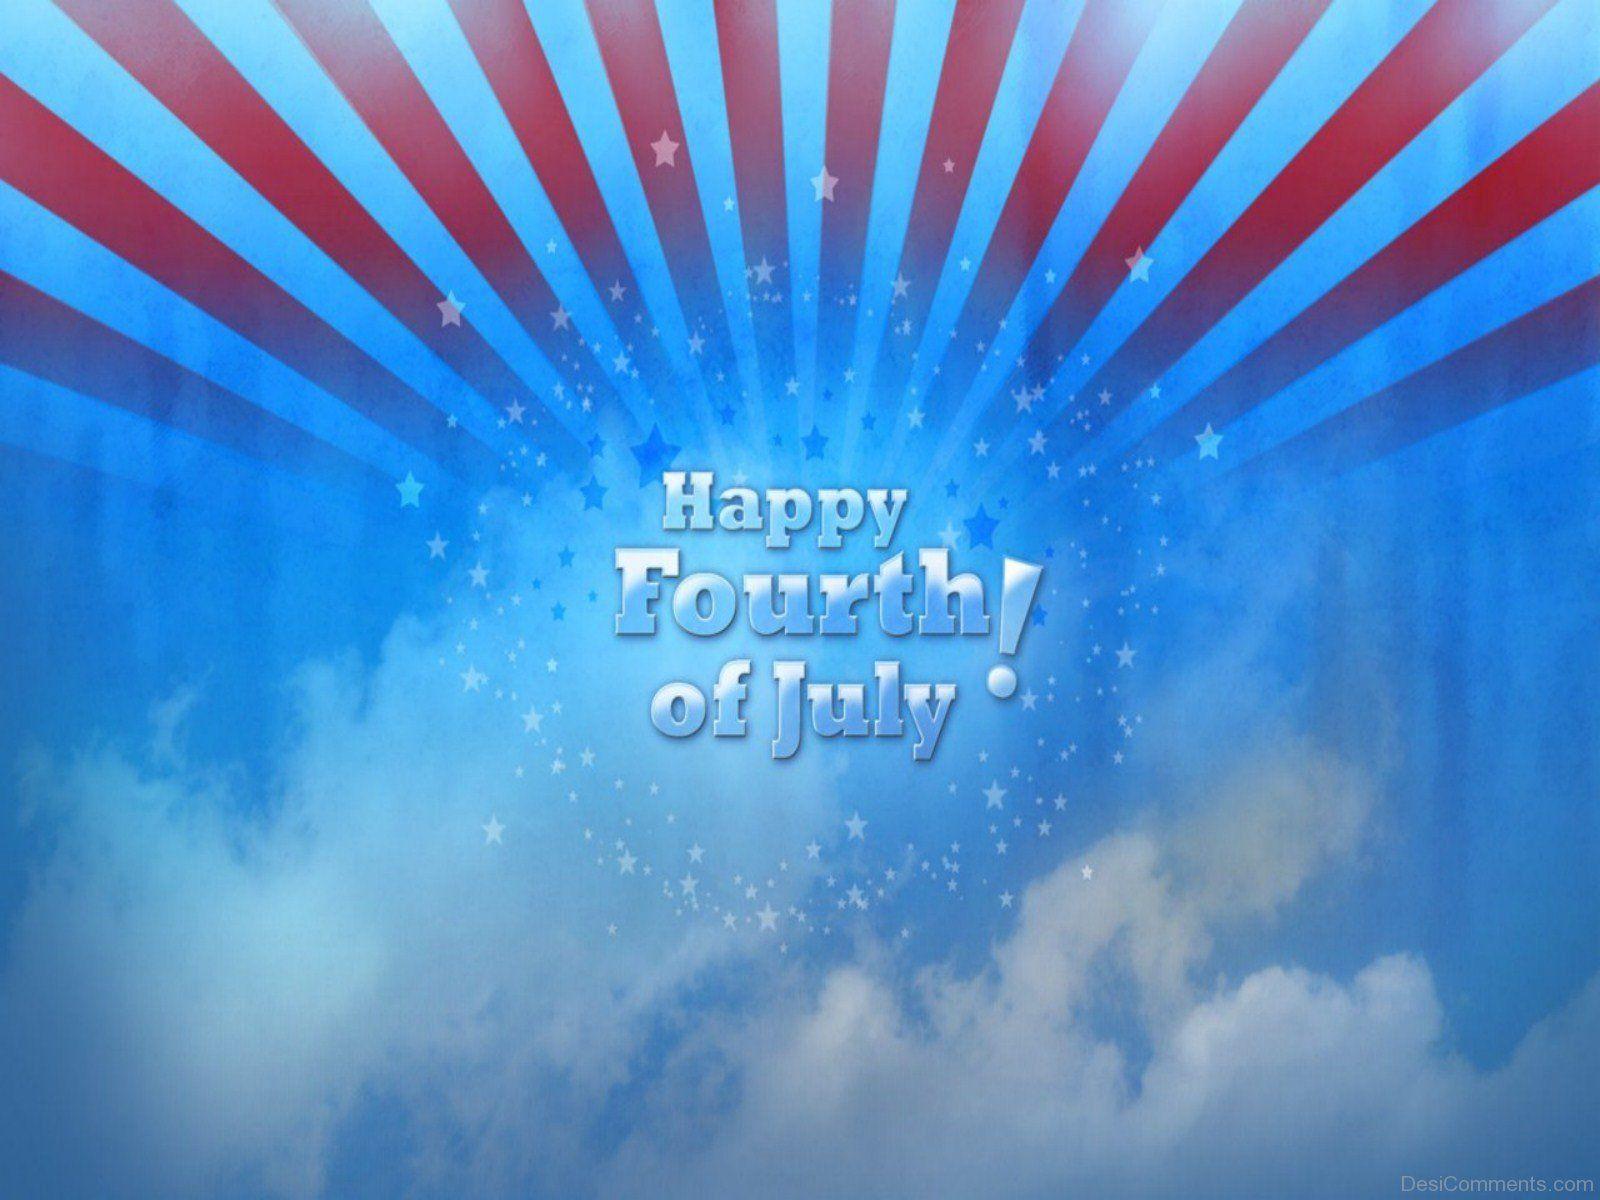 Happy 4th Of July Image, Picture, Photo, Pics, Wallpaper 2018